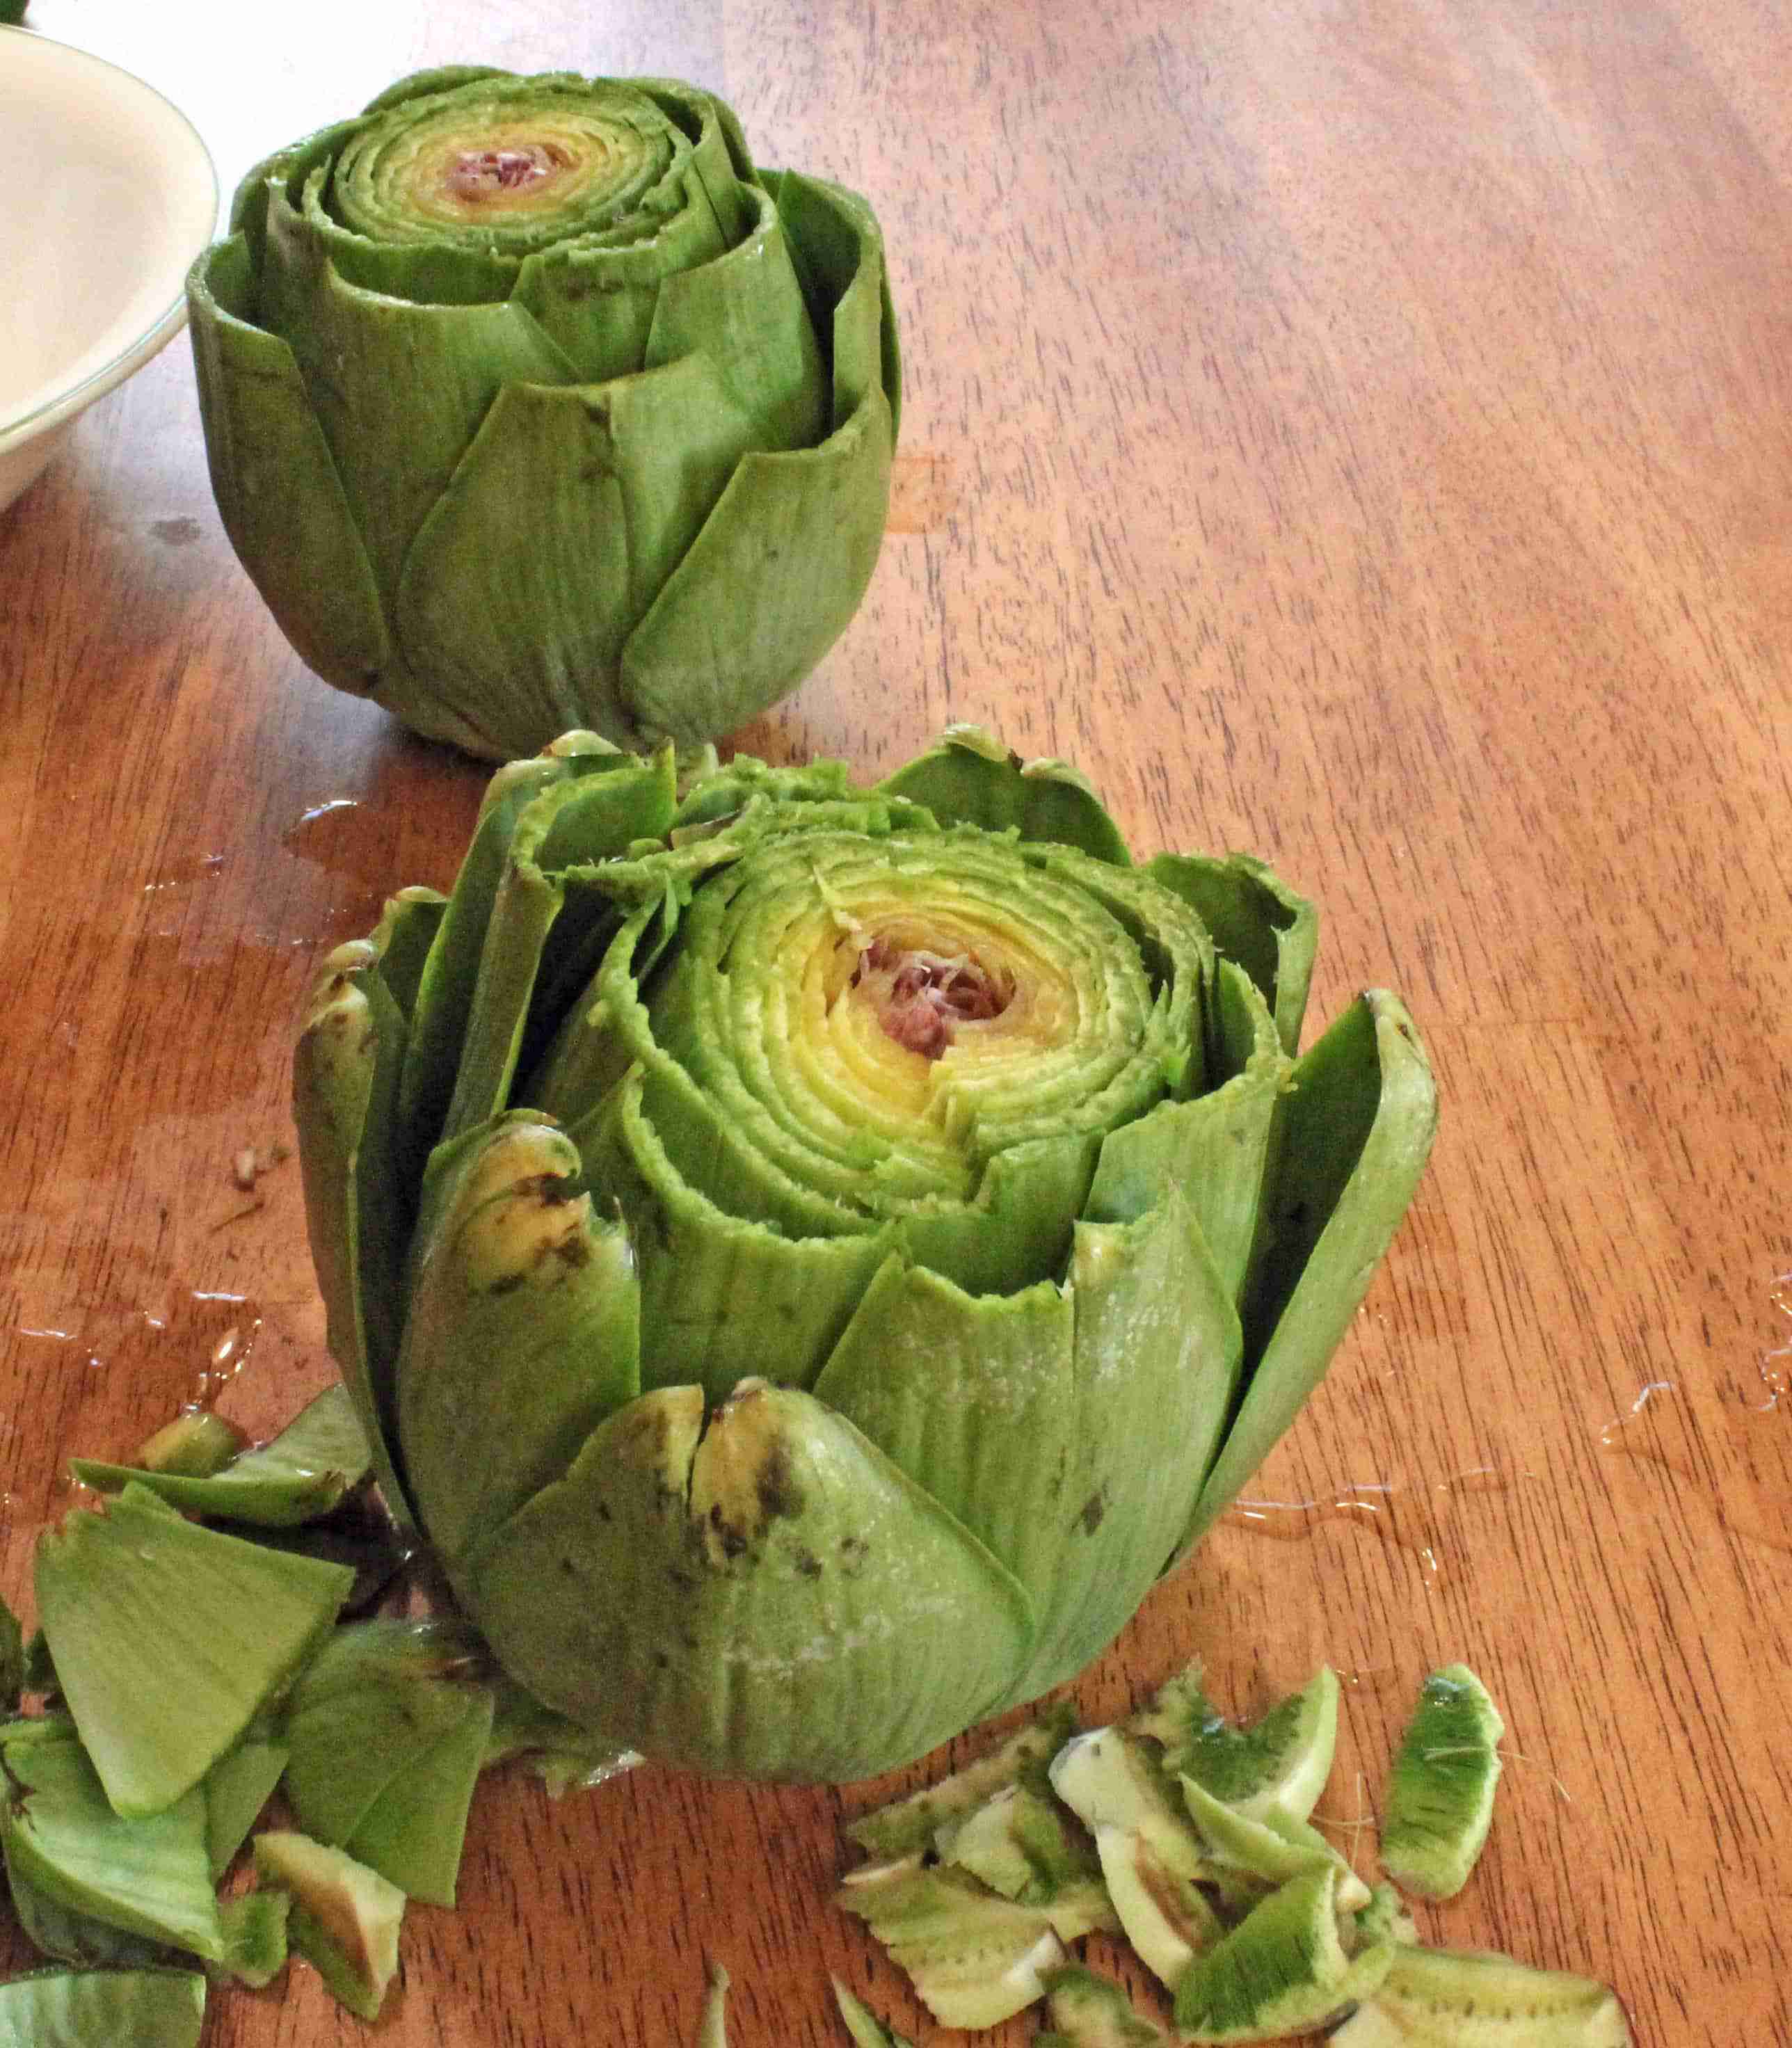 Artichokes Know Your Fruits and Veggies